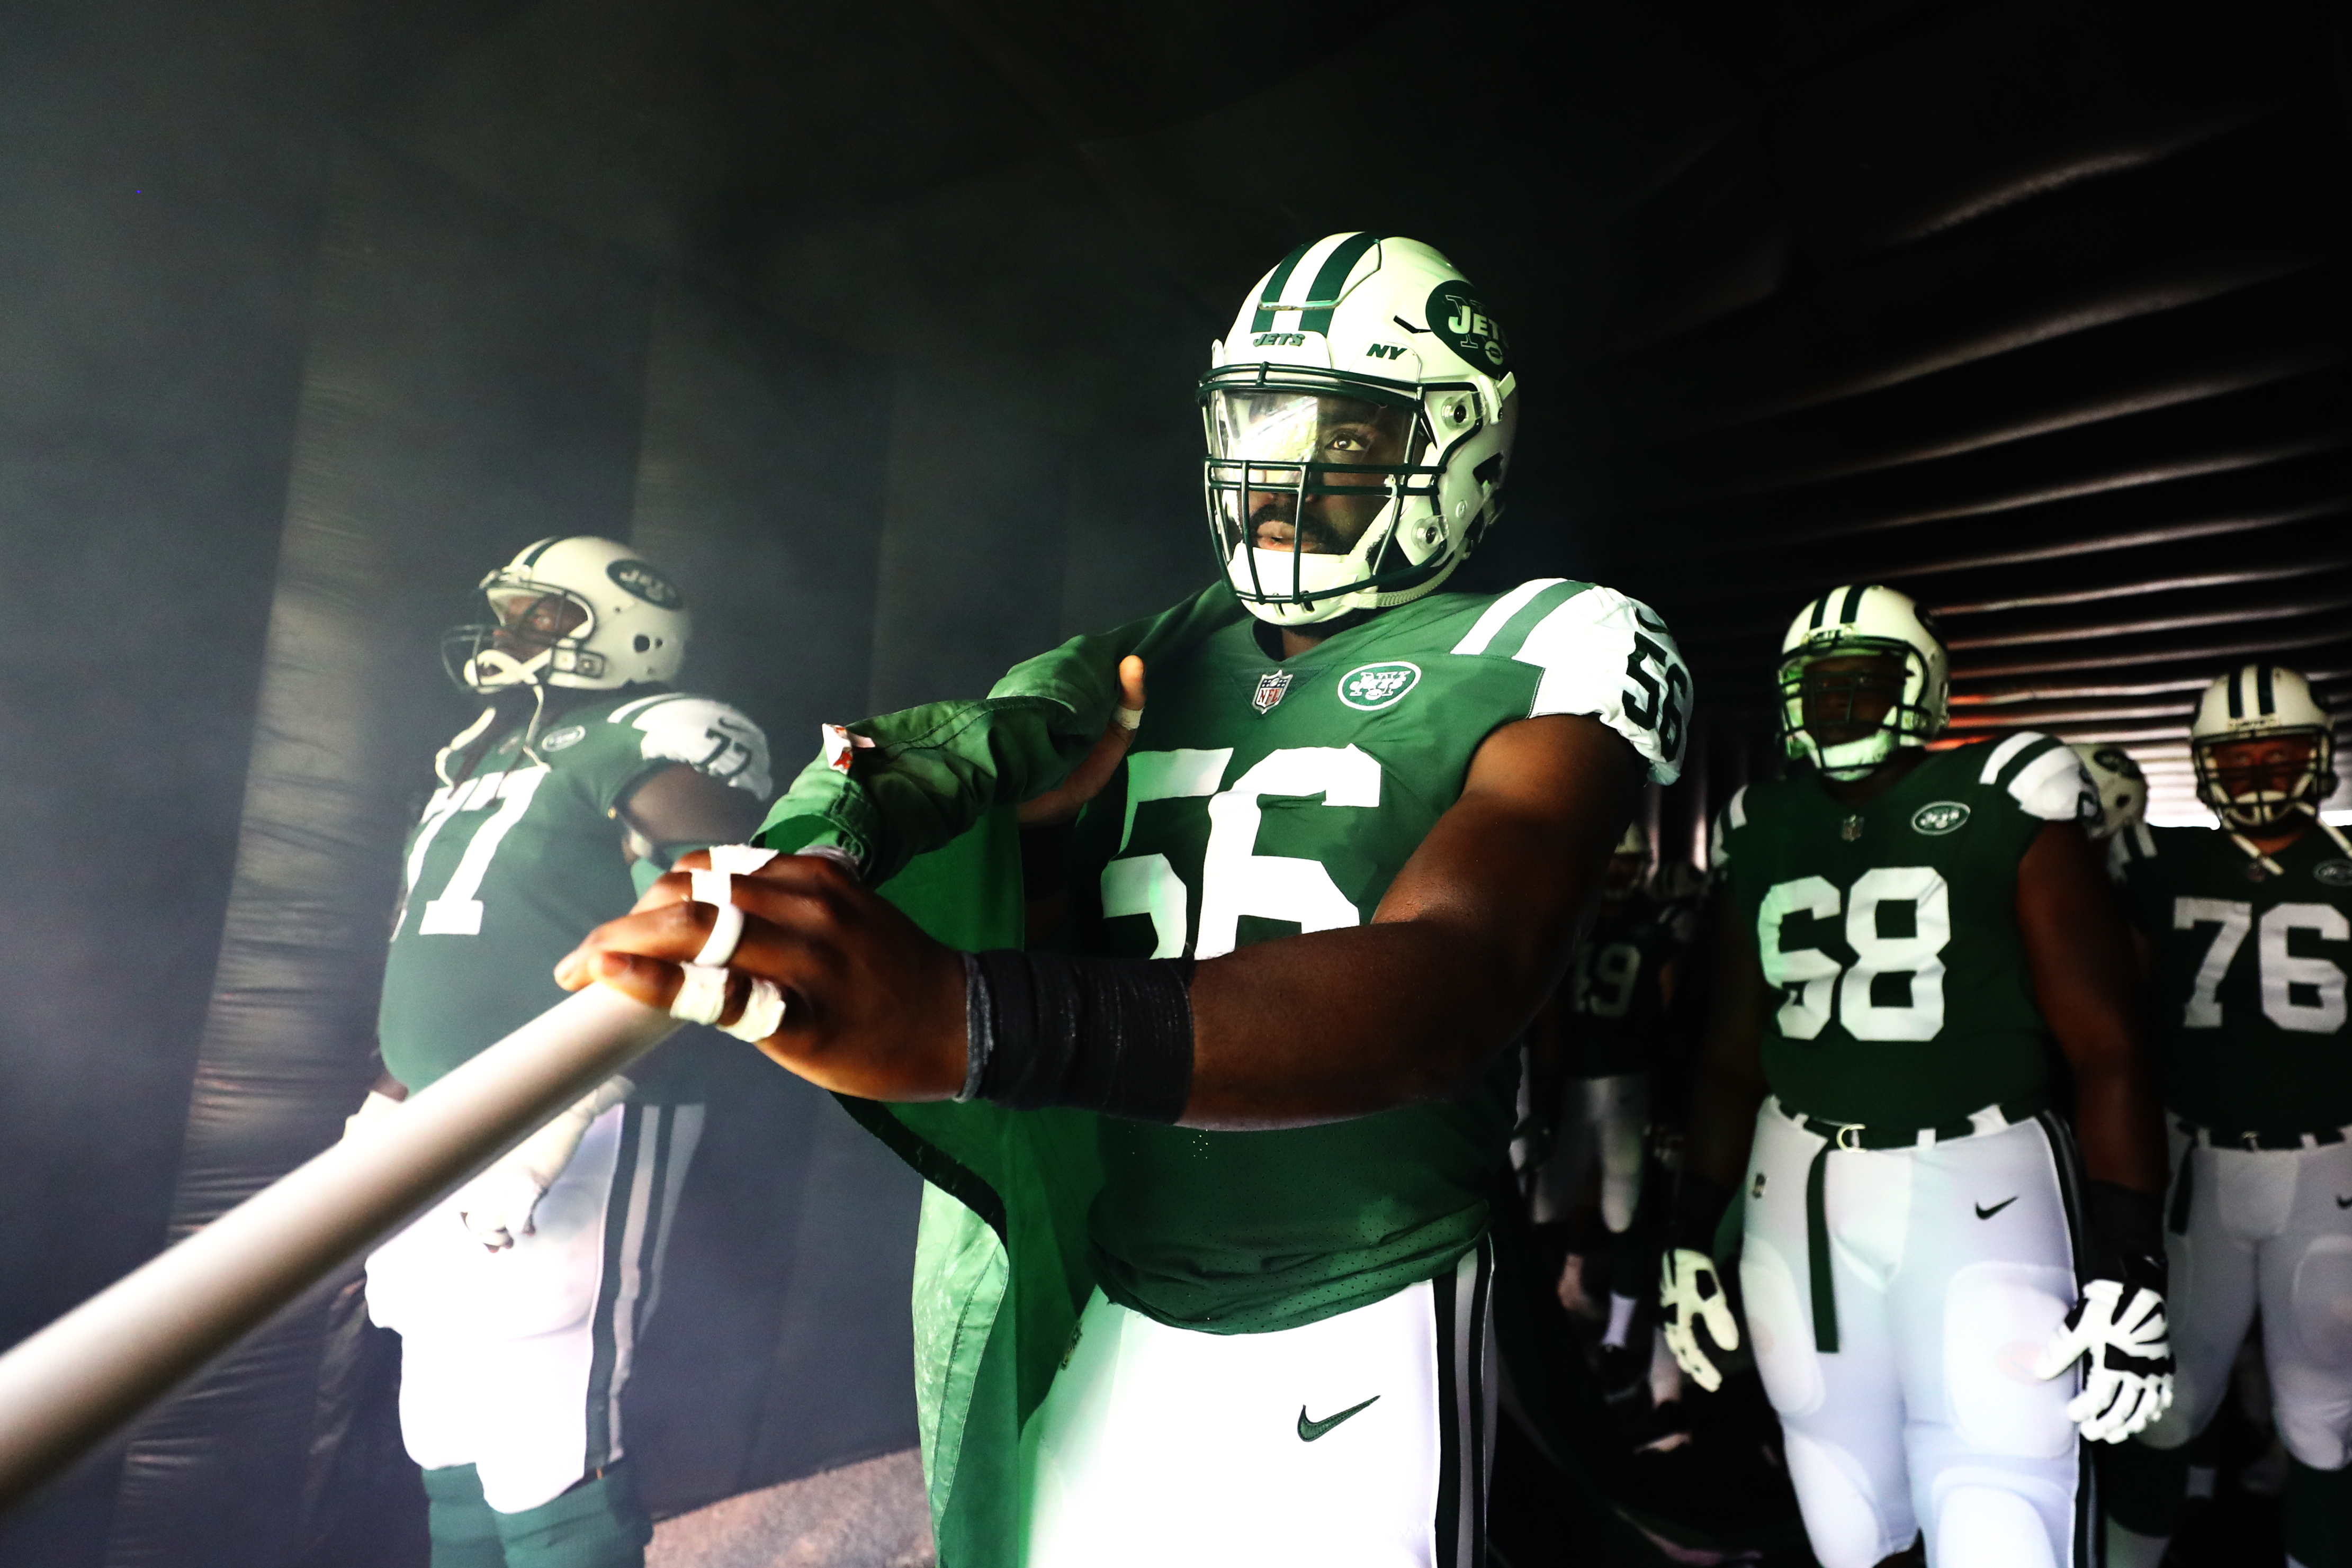 EAST RUTHERFORD, NJ - New York Jets linebacker Demario Davis (56) prepares to carry the team flag out onto the field during pregame ceremonies before a regular season contest against the Miami Dolphins at MetLife Stadium.